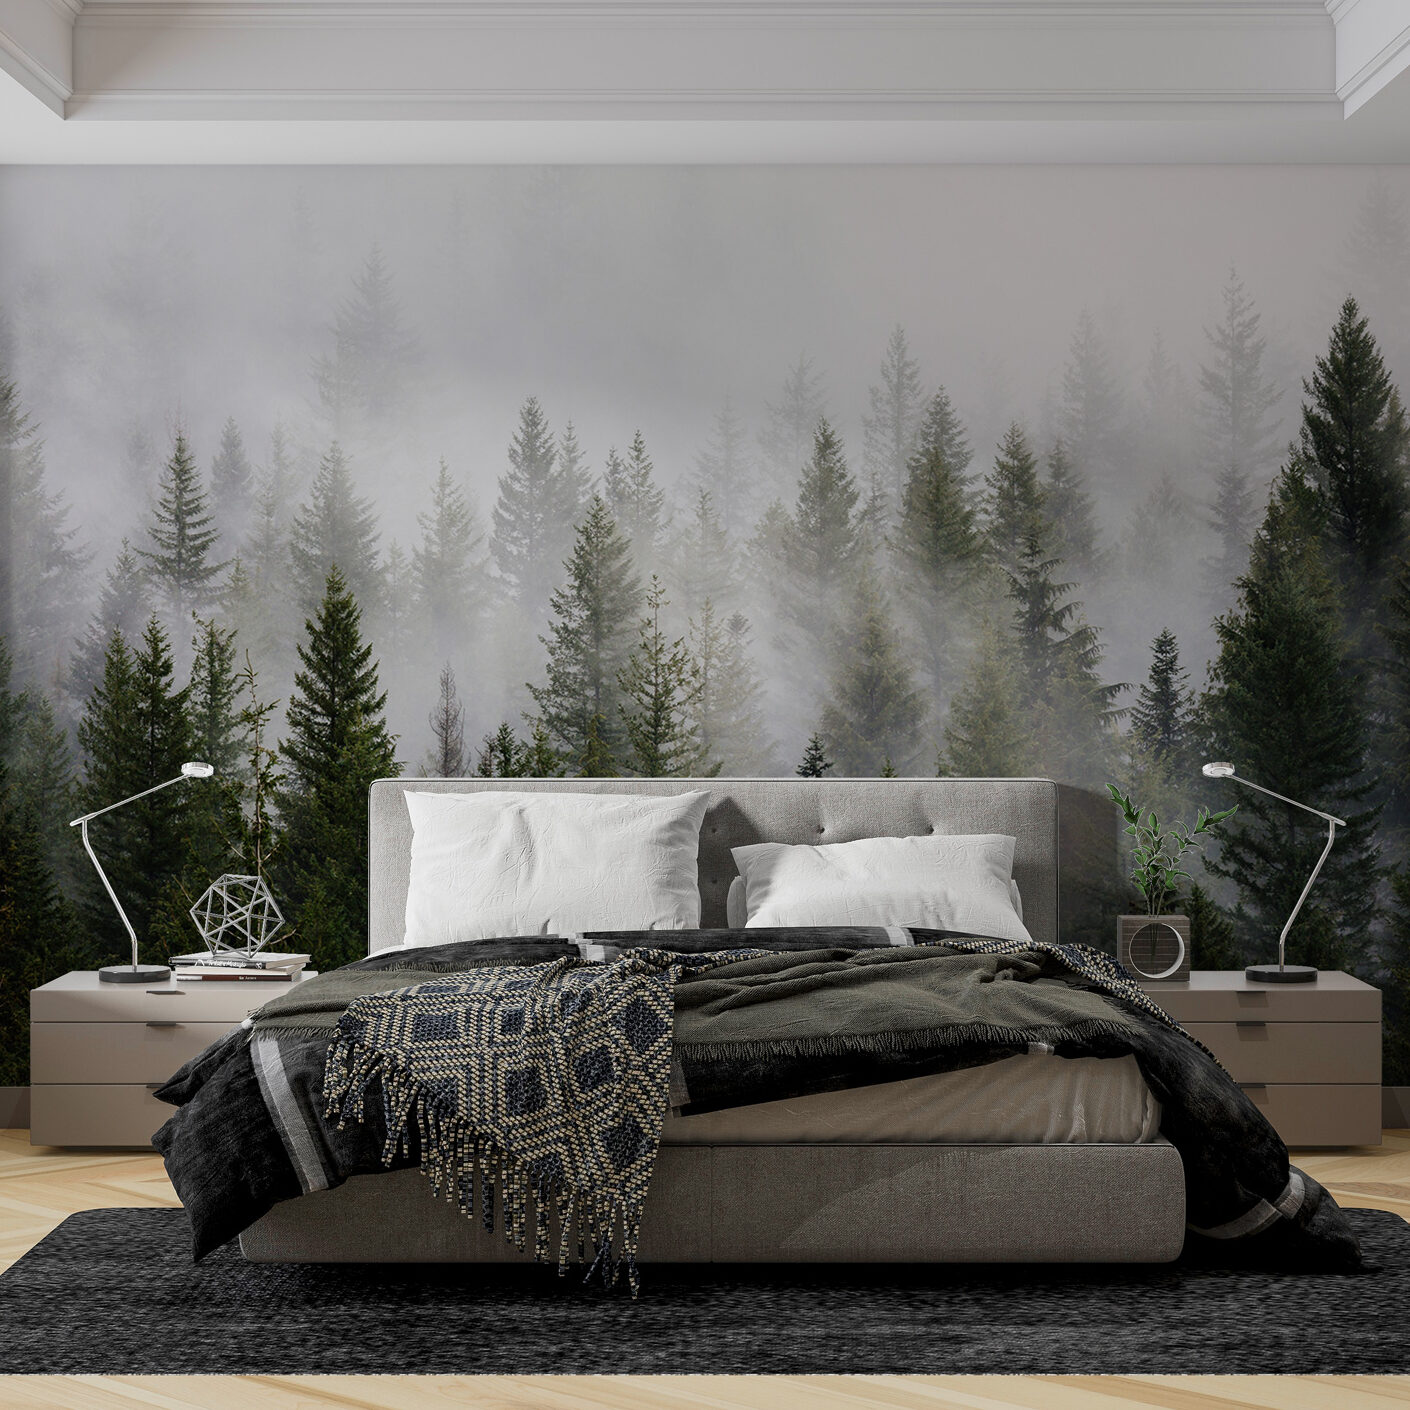 Forest Wallpaper  Bedroom  Dorset  by HaBe Ltd  Houzz IE